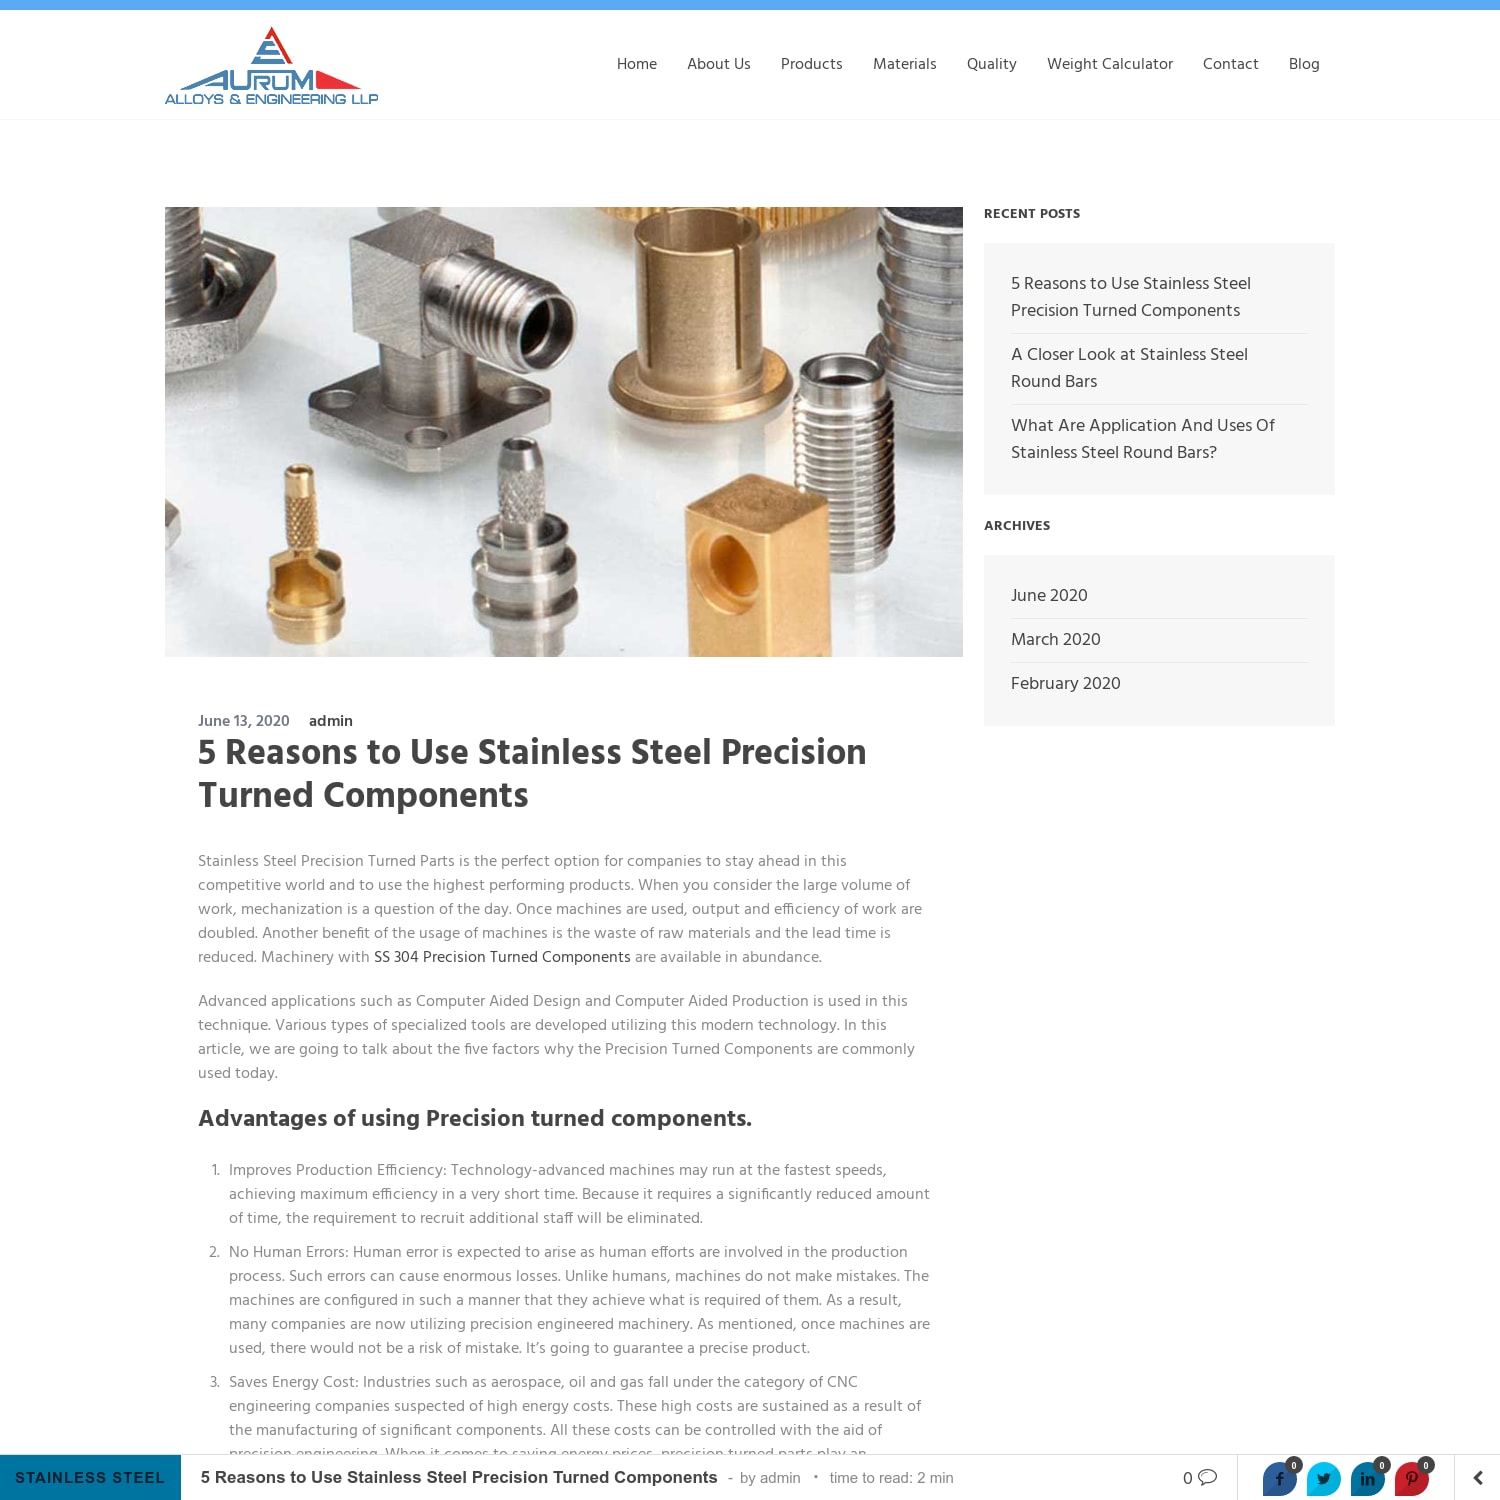 5 Reasons to Use Stainless Steel Precision Turned Components